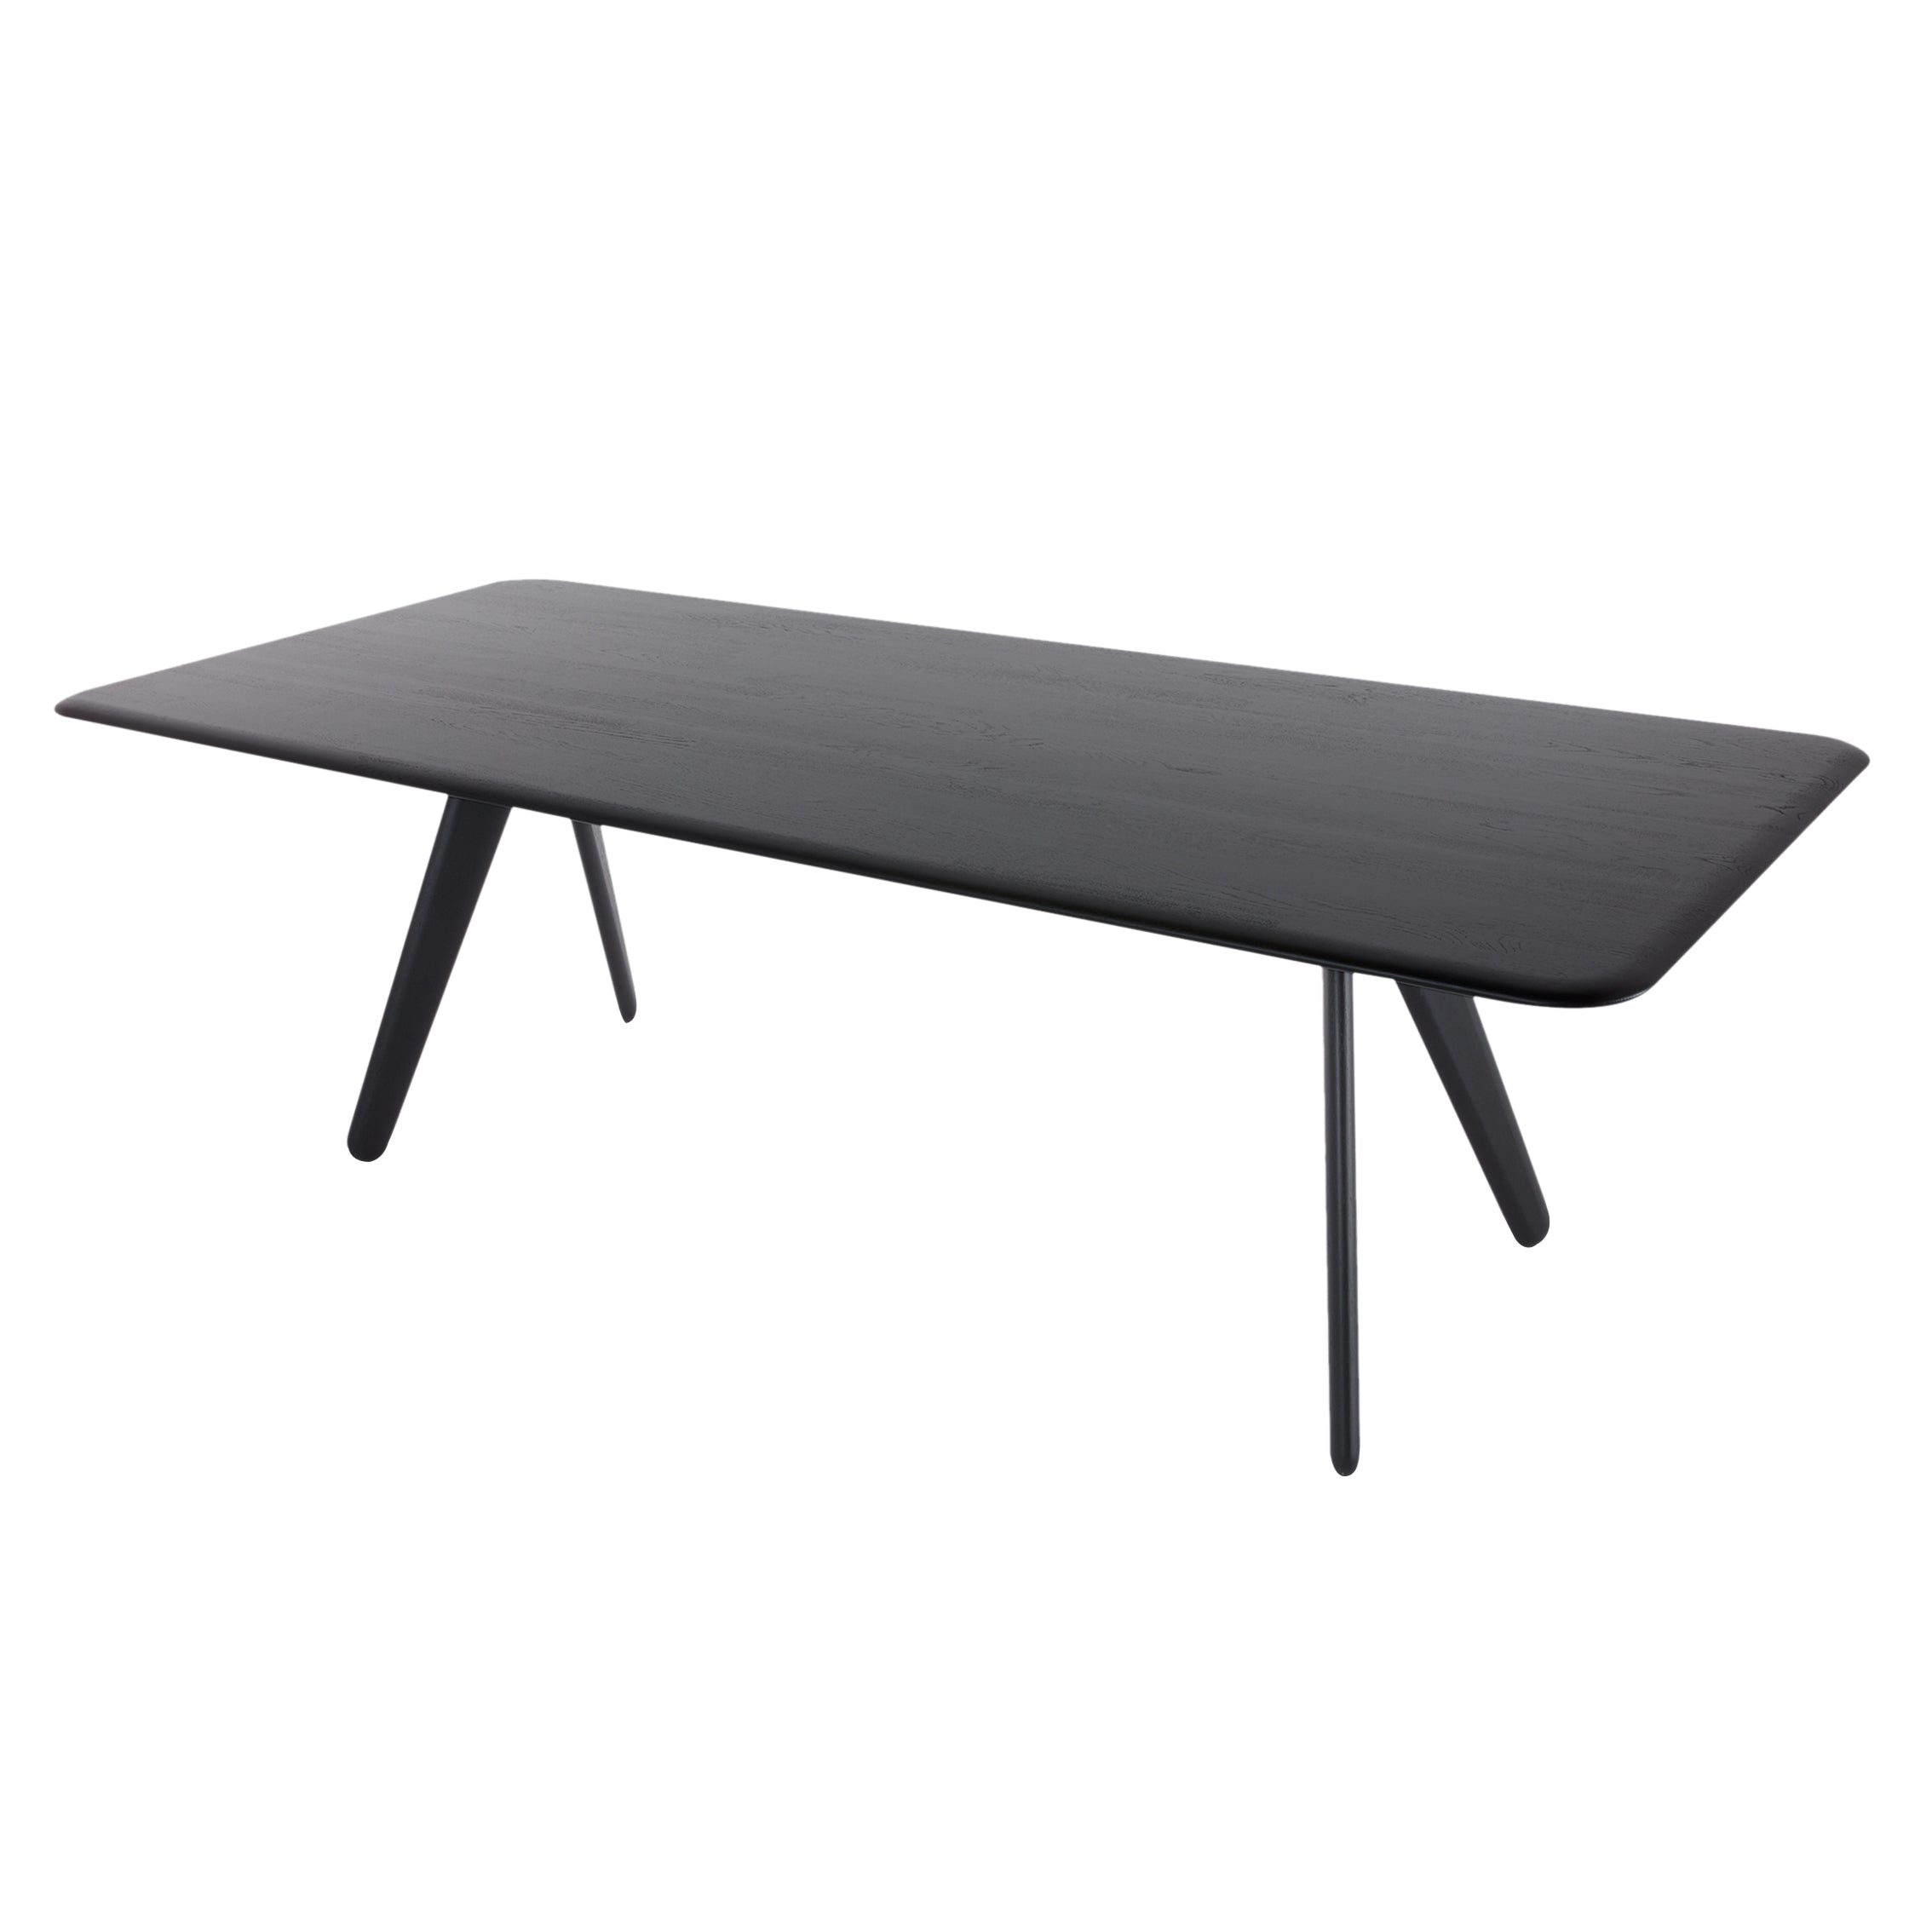 Slab Dining Table | Buy Tom Dixon online at A+R